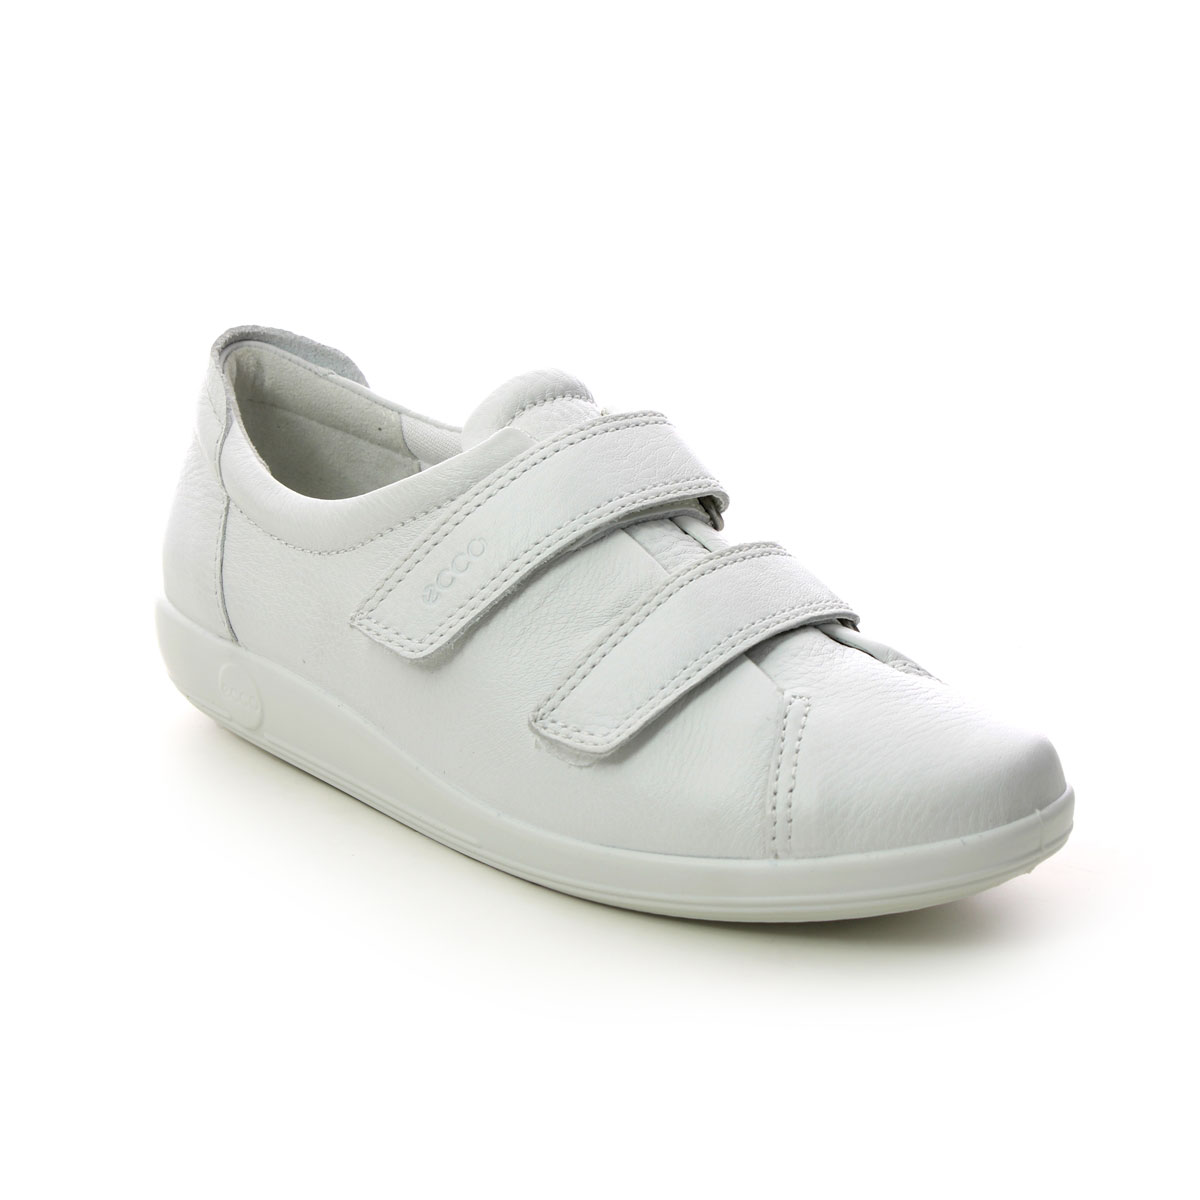 Ecco Soft 2.0 2V White Leather Womens Comfort Slip On Shoes 206513-01002 In Size 41 In Plain White Leather